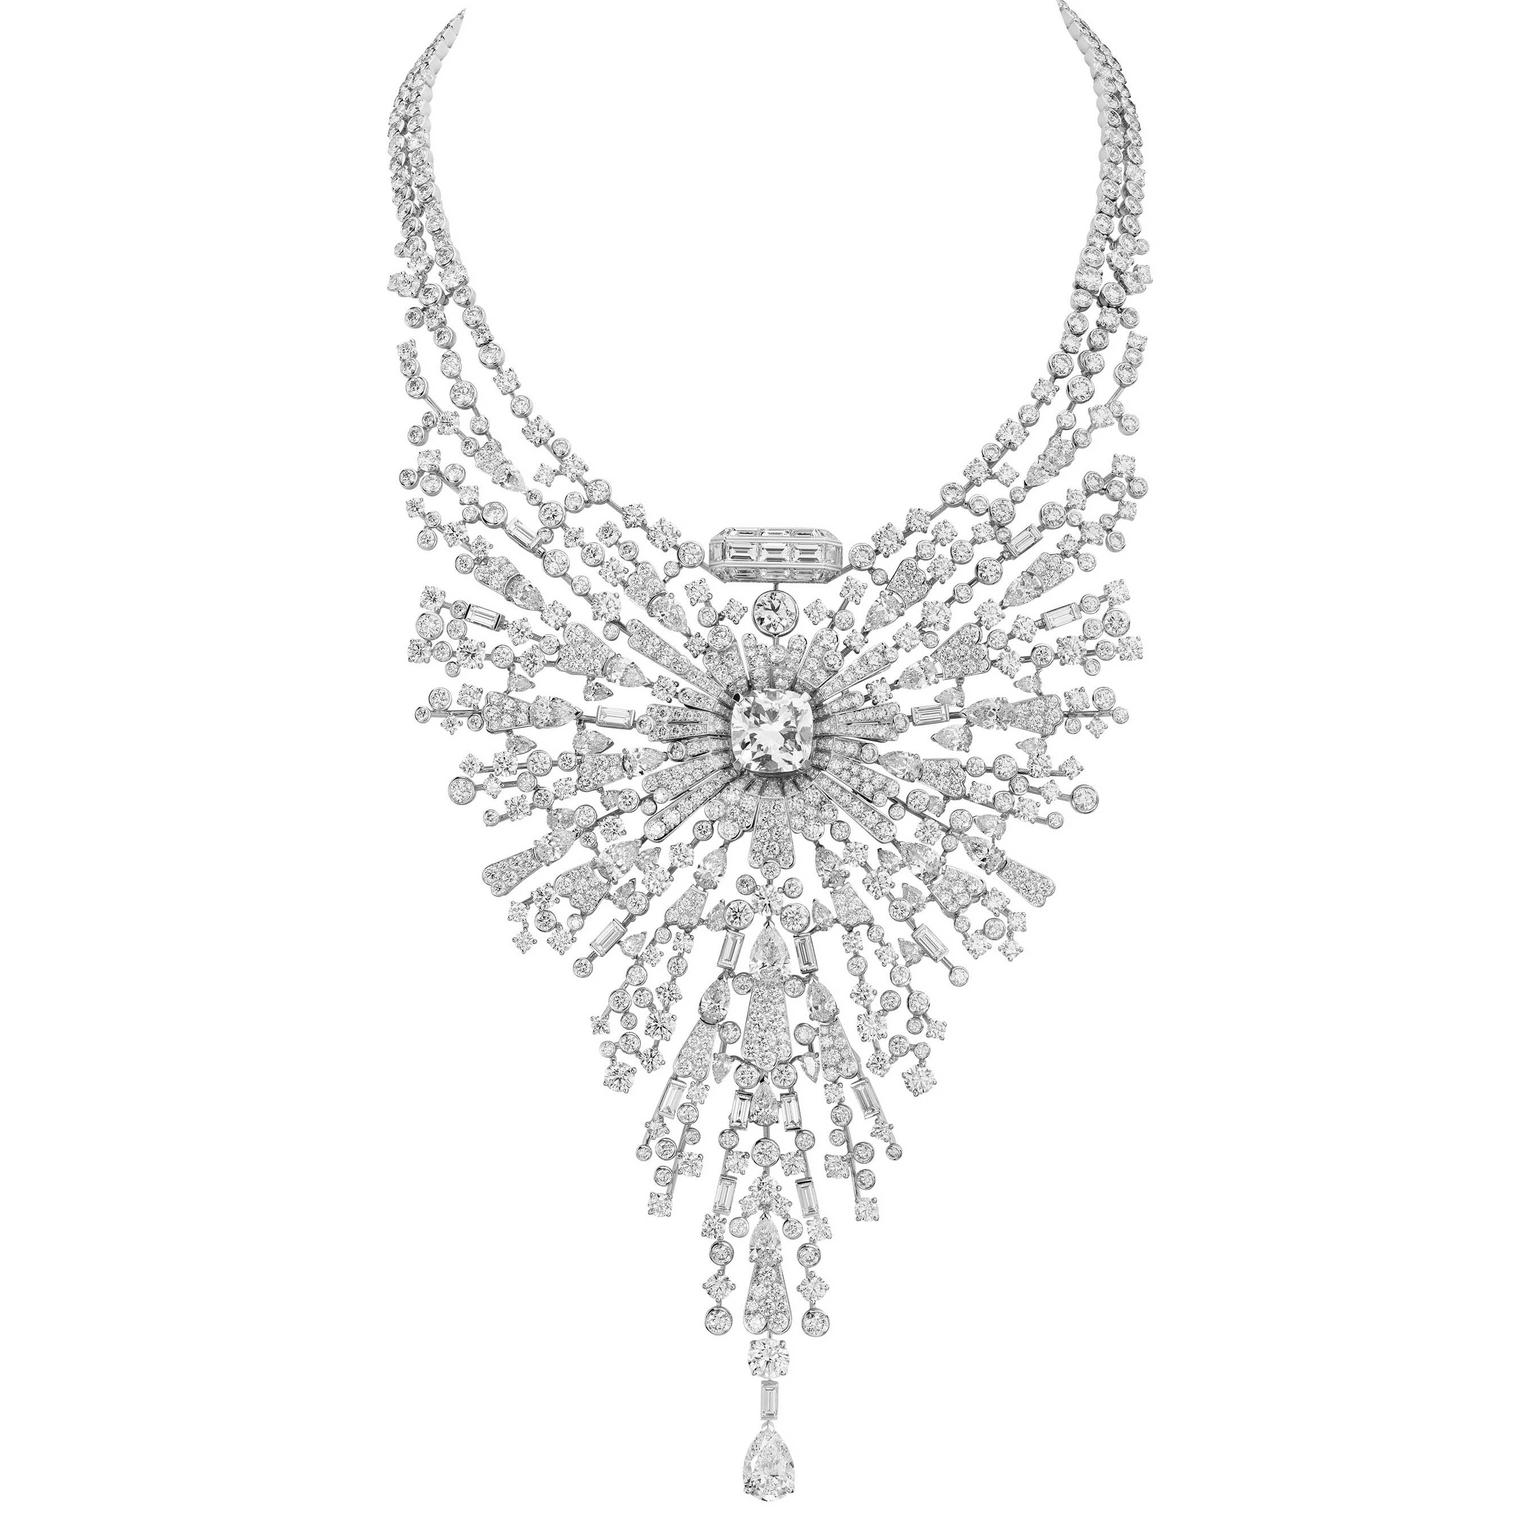 Chanel Collection No 5 DIAMOND SILLAGE necklace